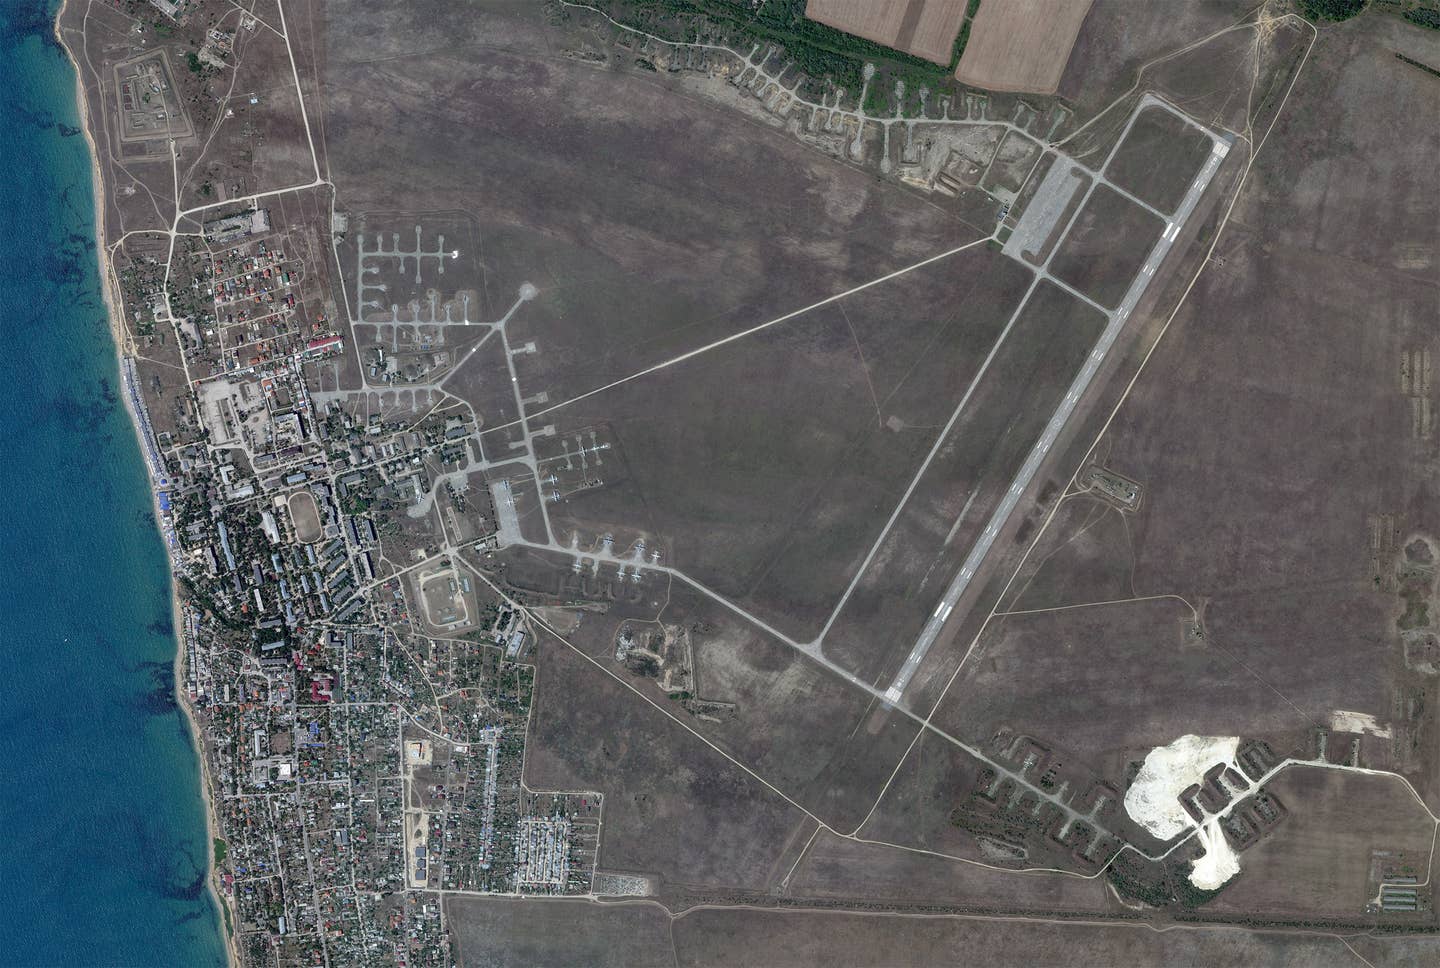 A satellite image of Kacha Air Base taken on July 20. <em>PHOTO © 2022 PLANET LABS INC. ALL RIGHTS RESERVED. REPRINTED BY PERMISSION</em>